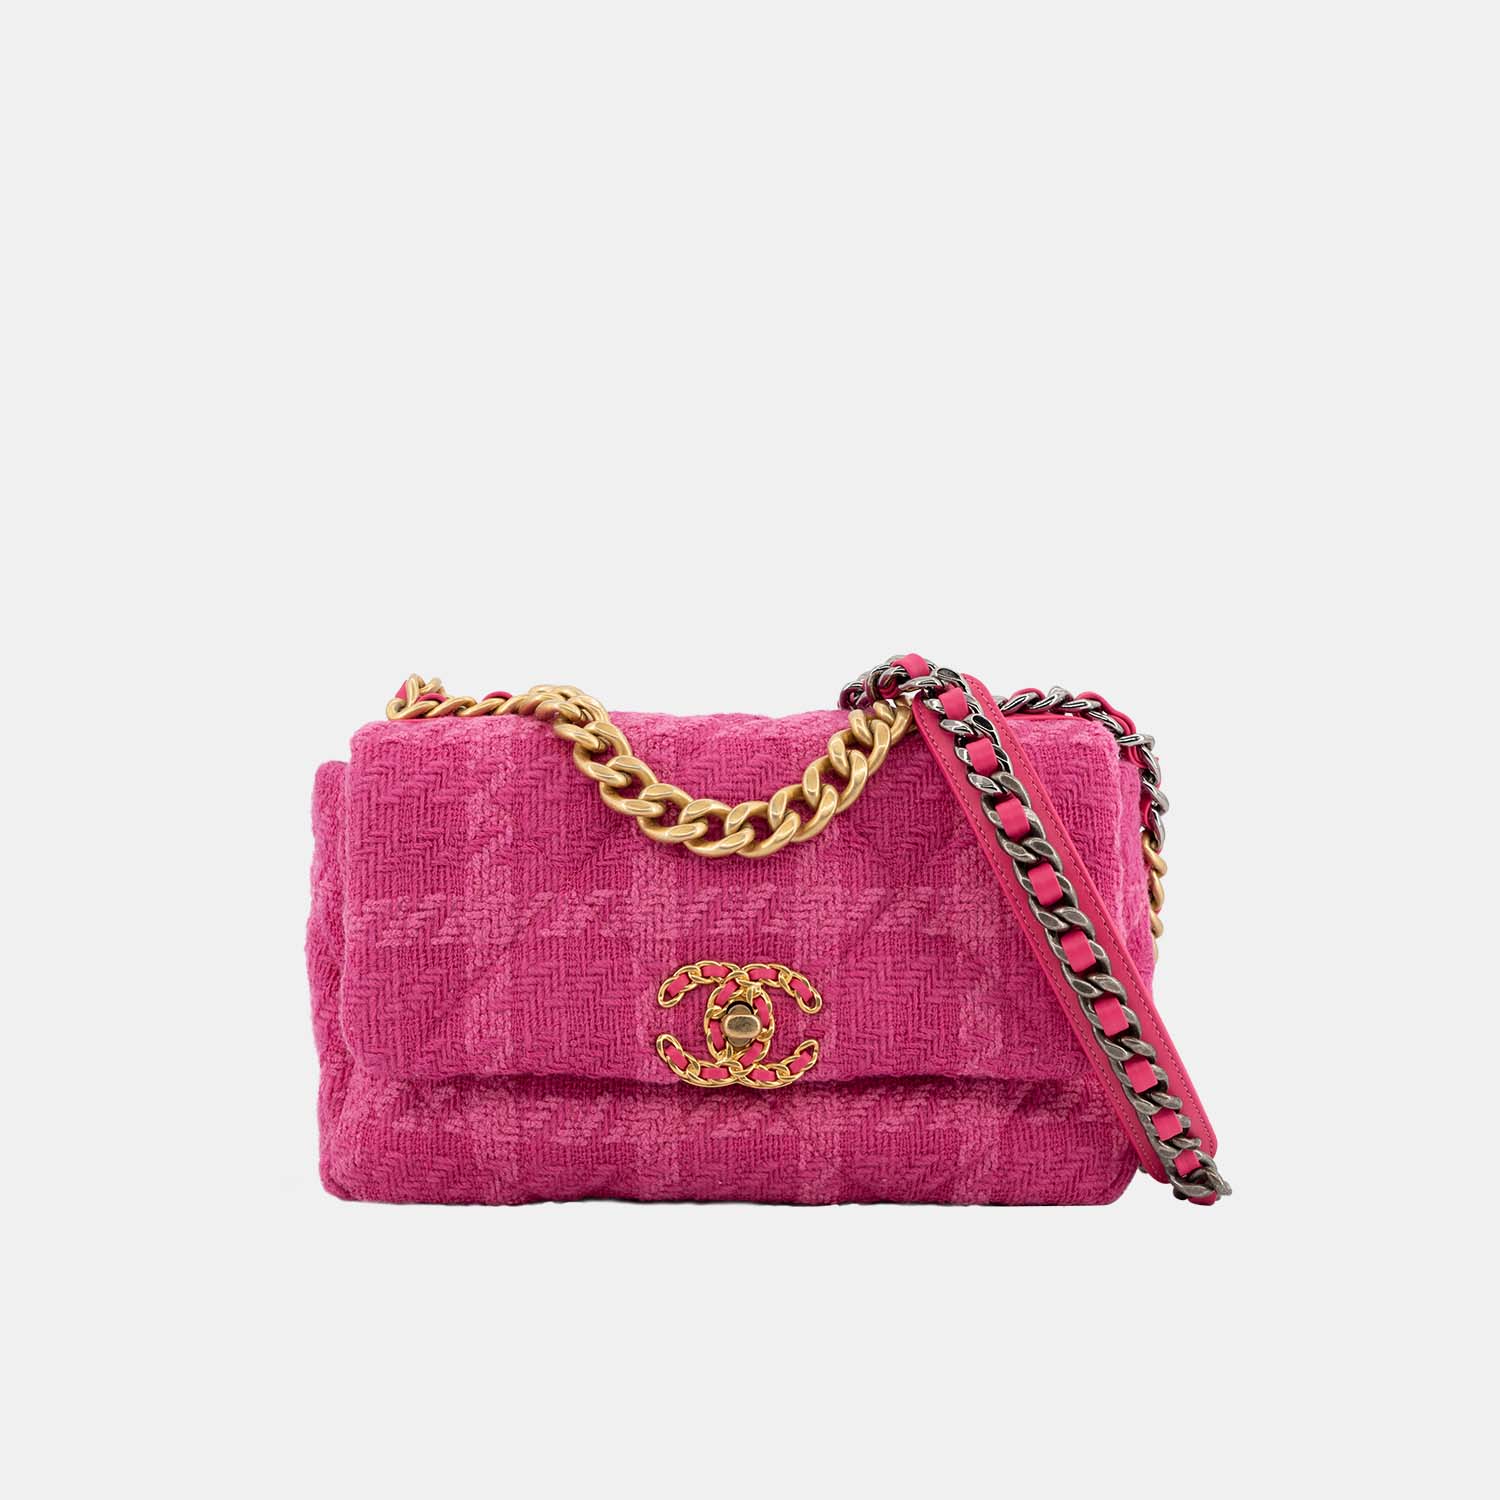 CHANEL, Bags, Oversized Chanel Cottontweed Purse